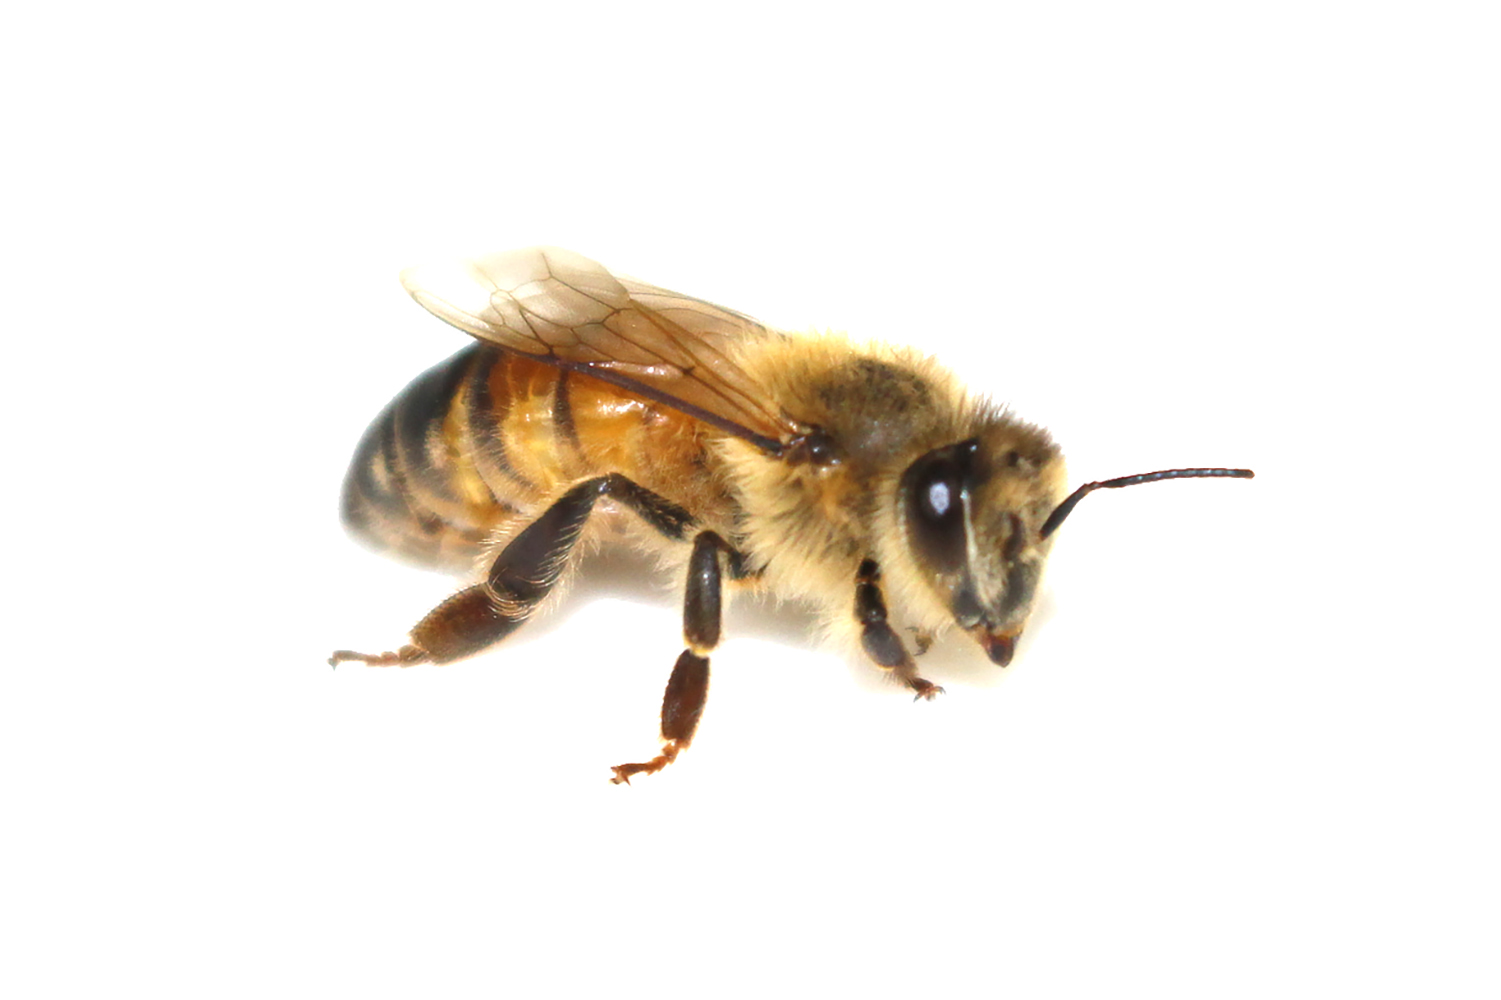 A close-up photograph of a honey bee.